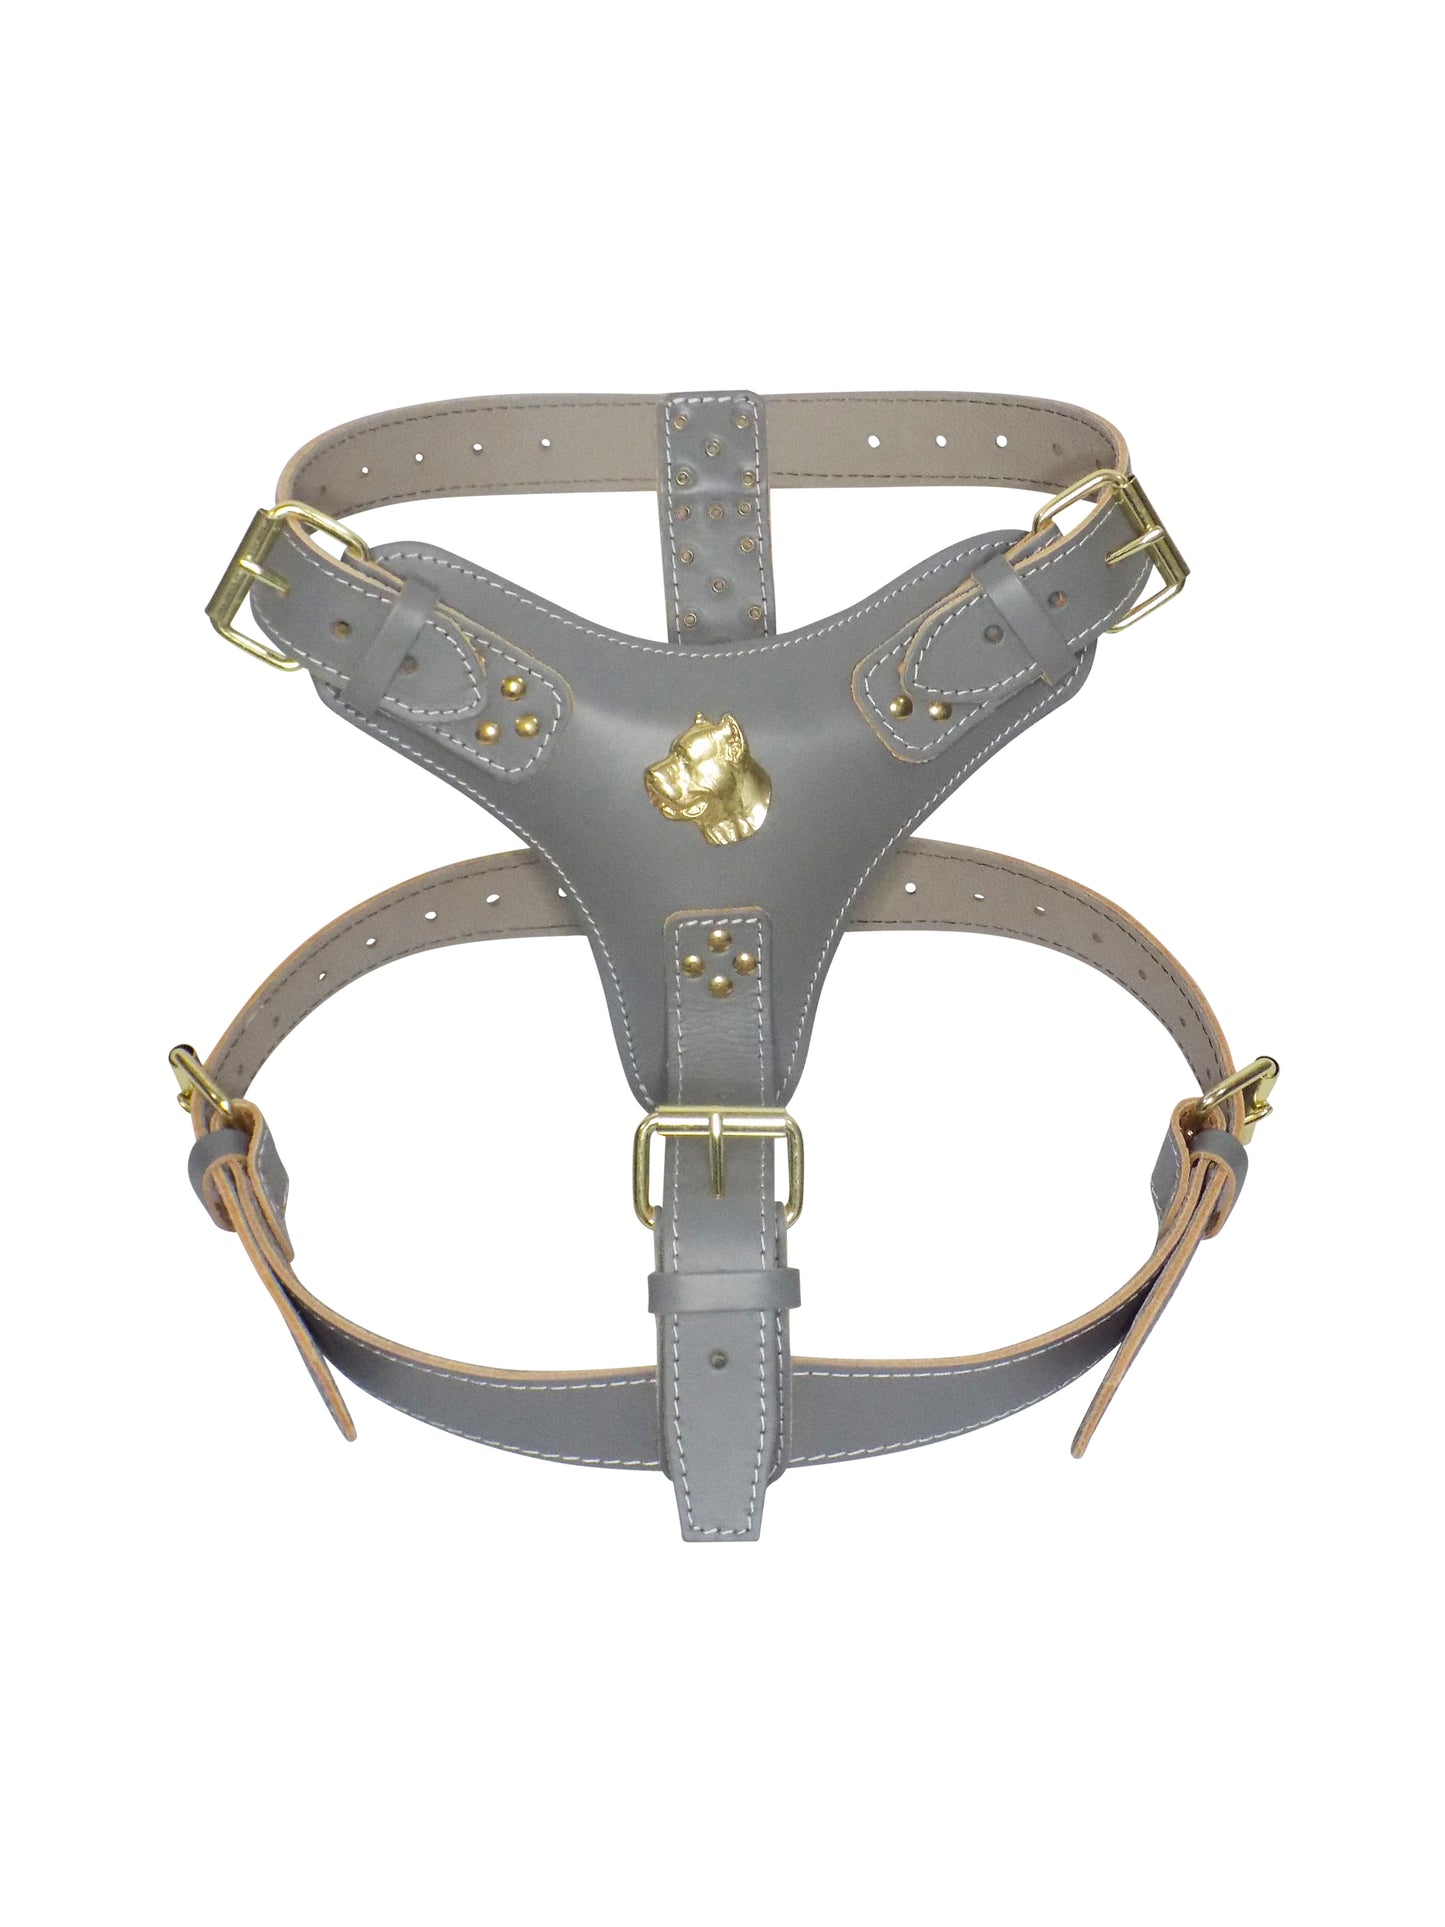 Extra Large Heavy Duty Leather Dog Harness with Gold Cane Corso Head Motif